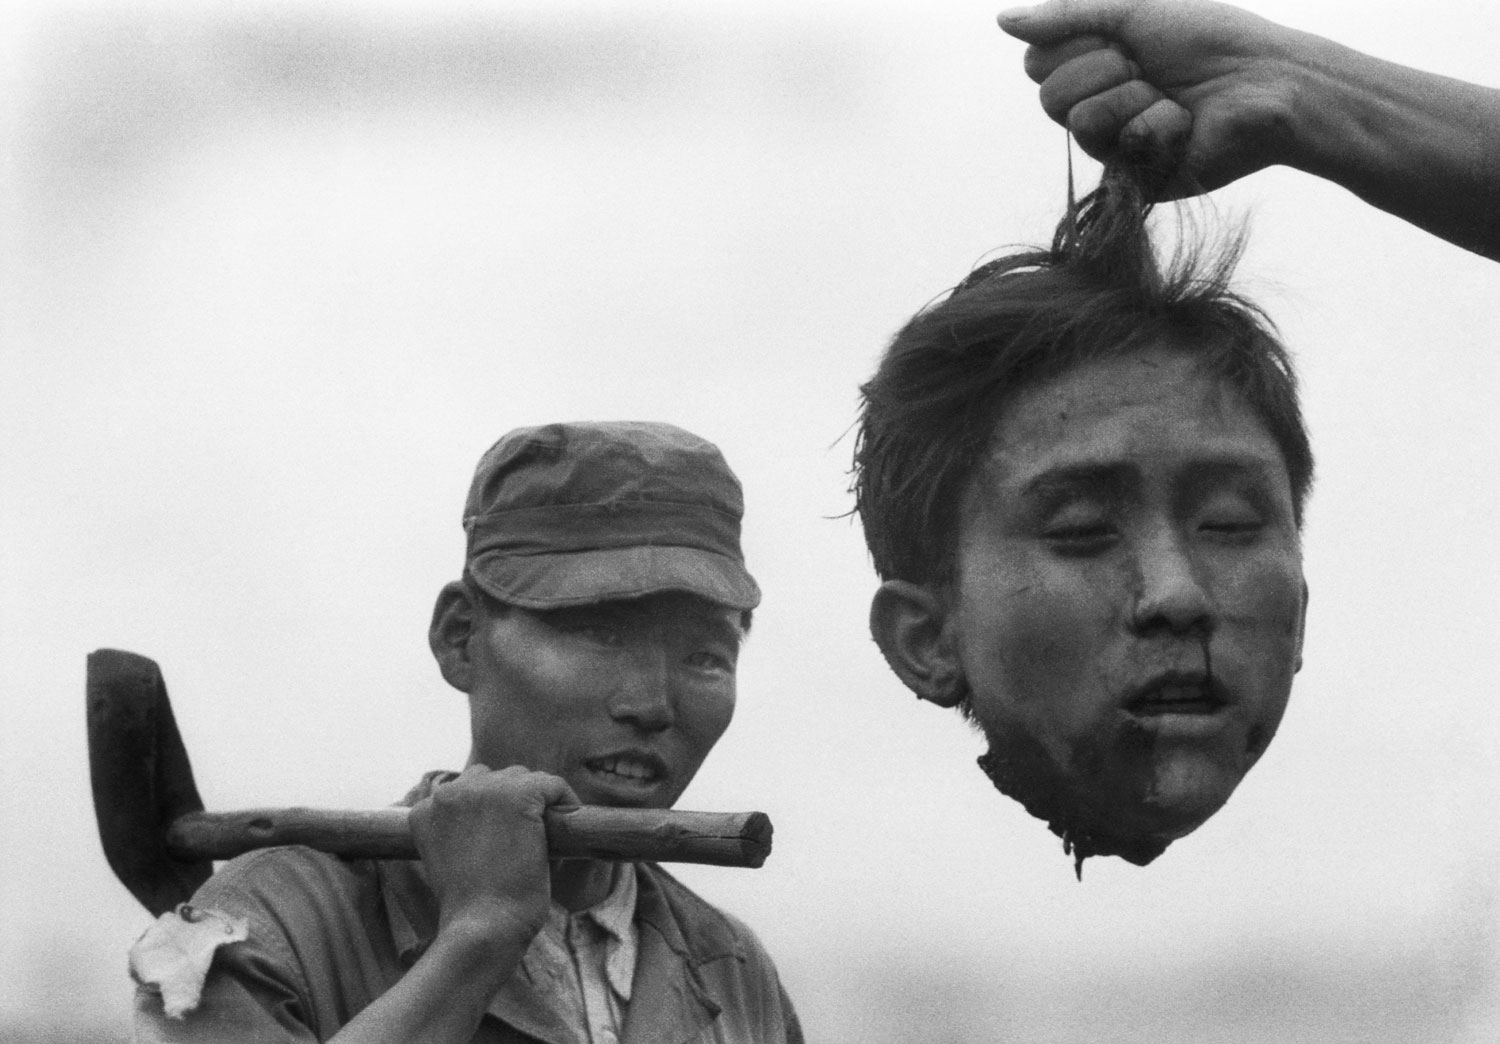 Hand of unseen South Korean holding severed head of North Korean Communist guerrilla by his hair as a member of the South Korean National Police, smiles broadly, w. an axe over his shoulder.